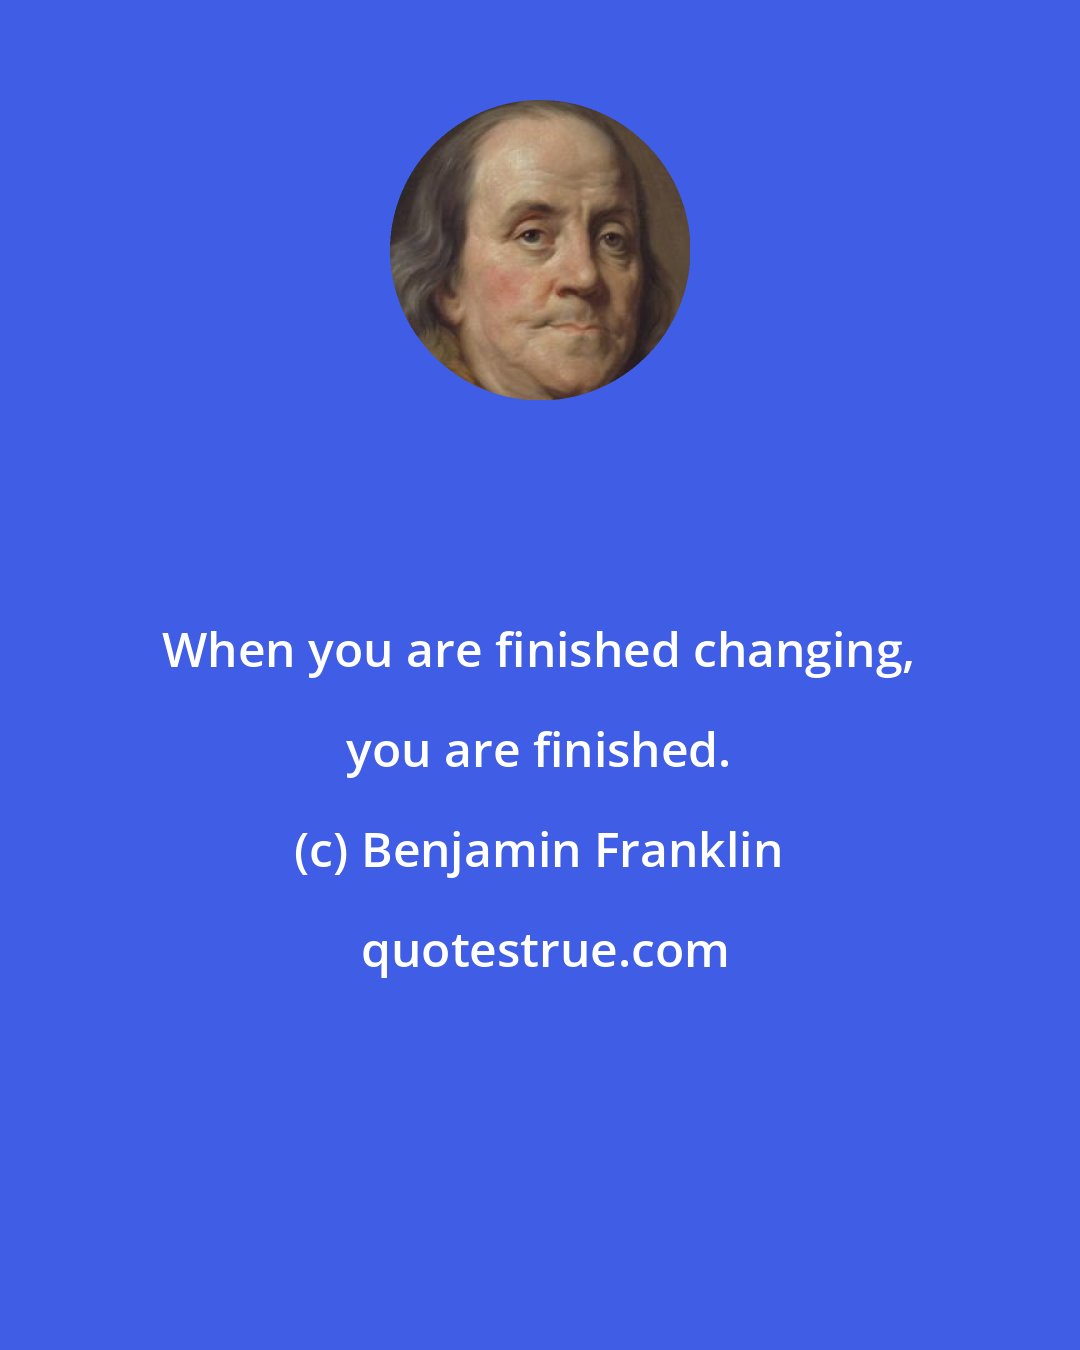 Benjamin Franklin: When you are finished changing, you are finished.